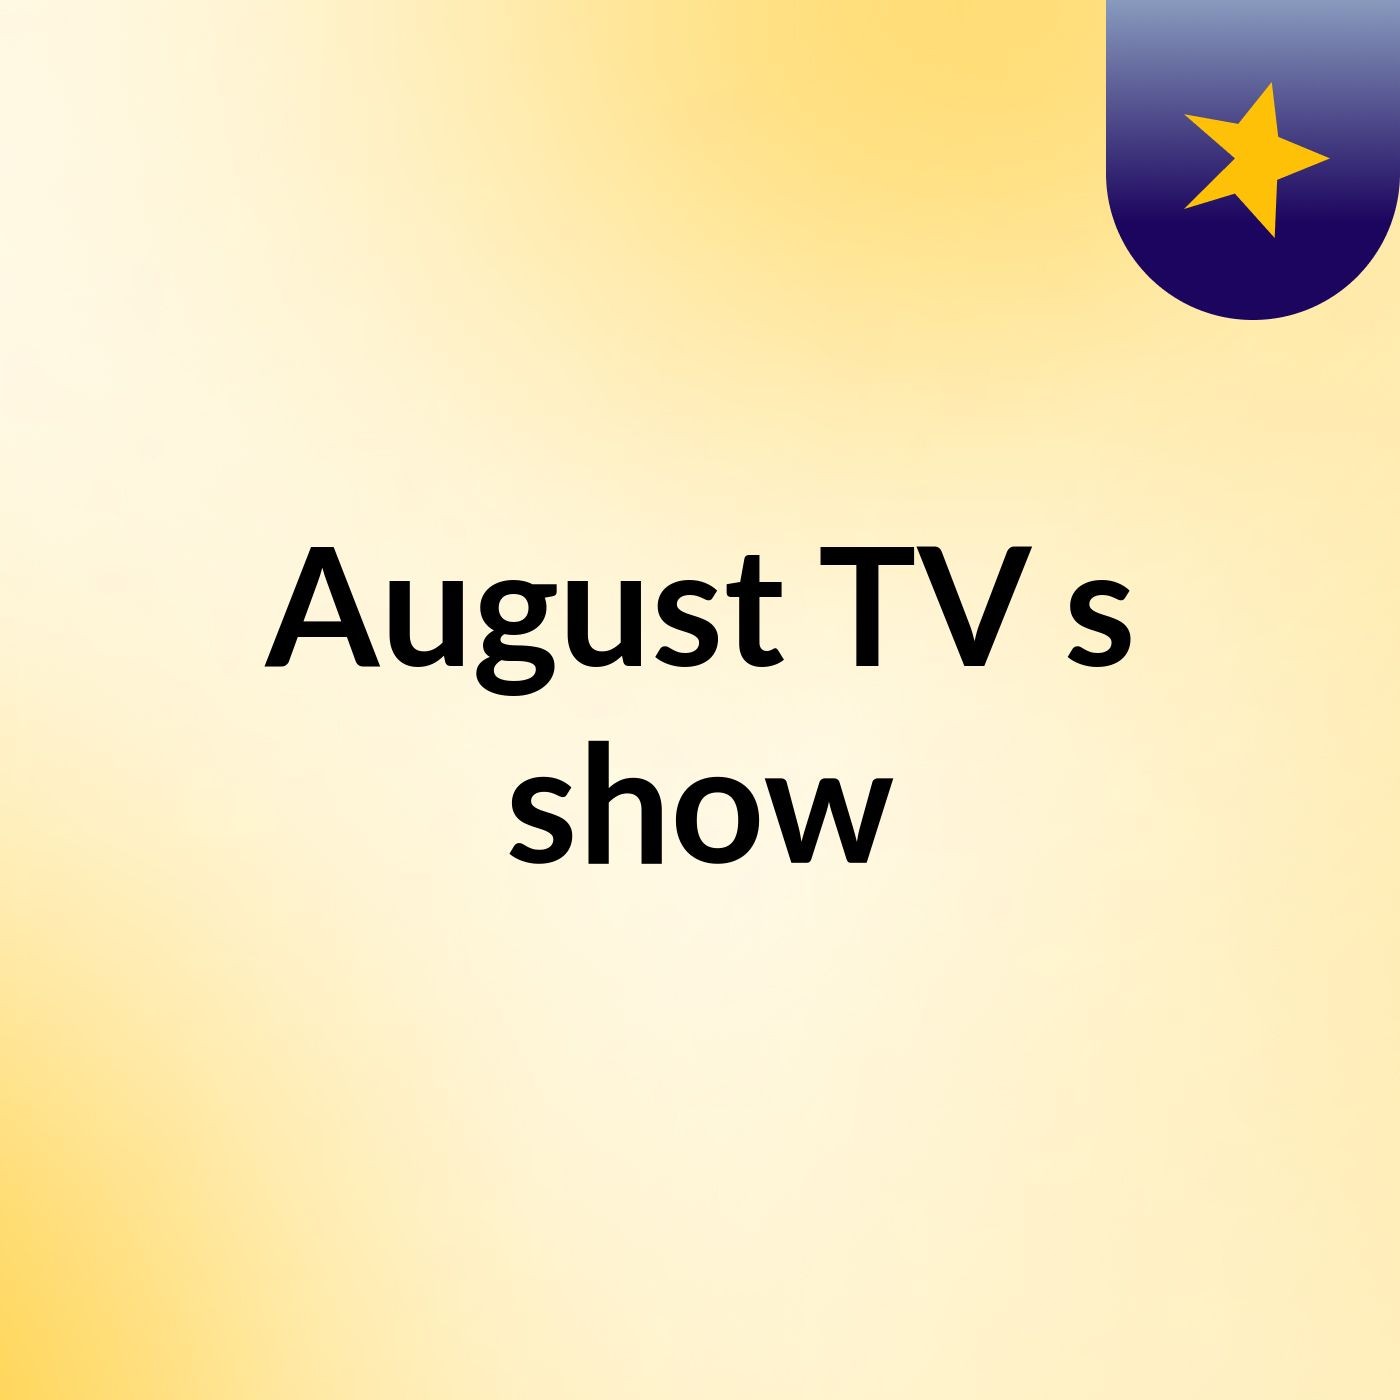 August TV's show